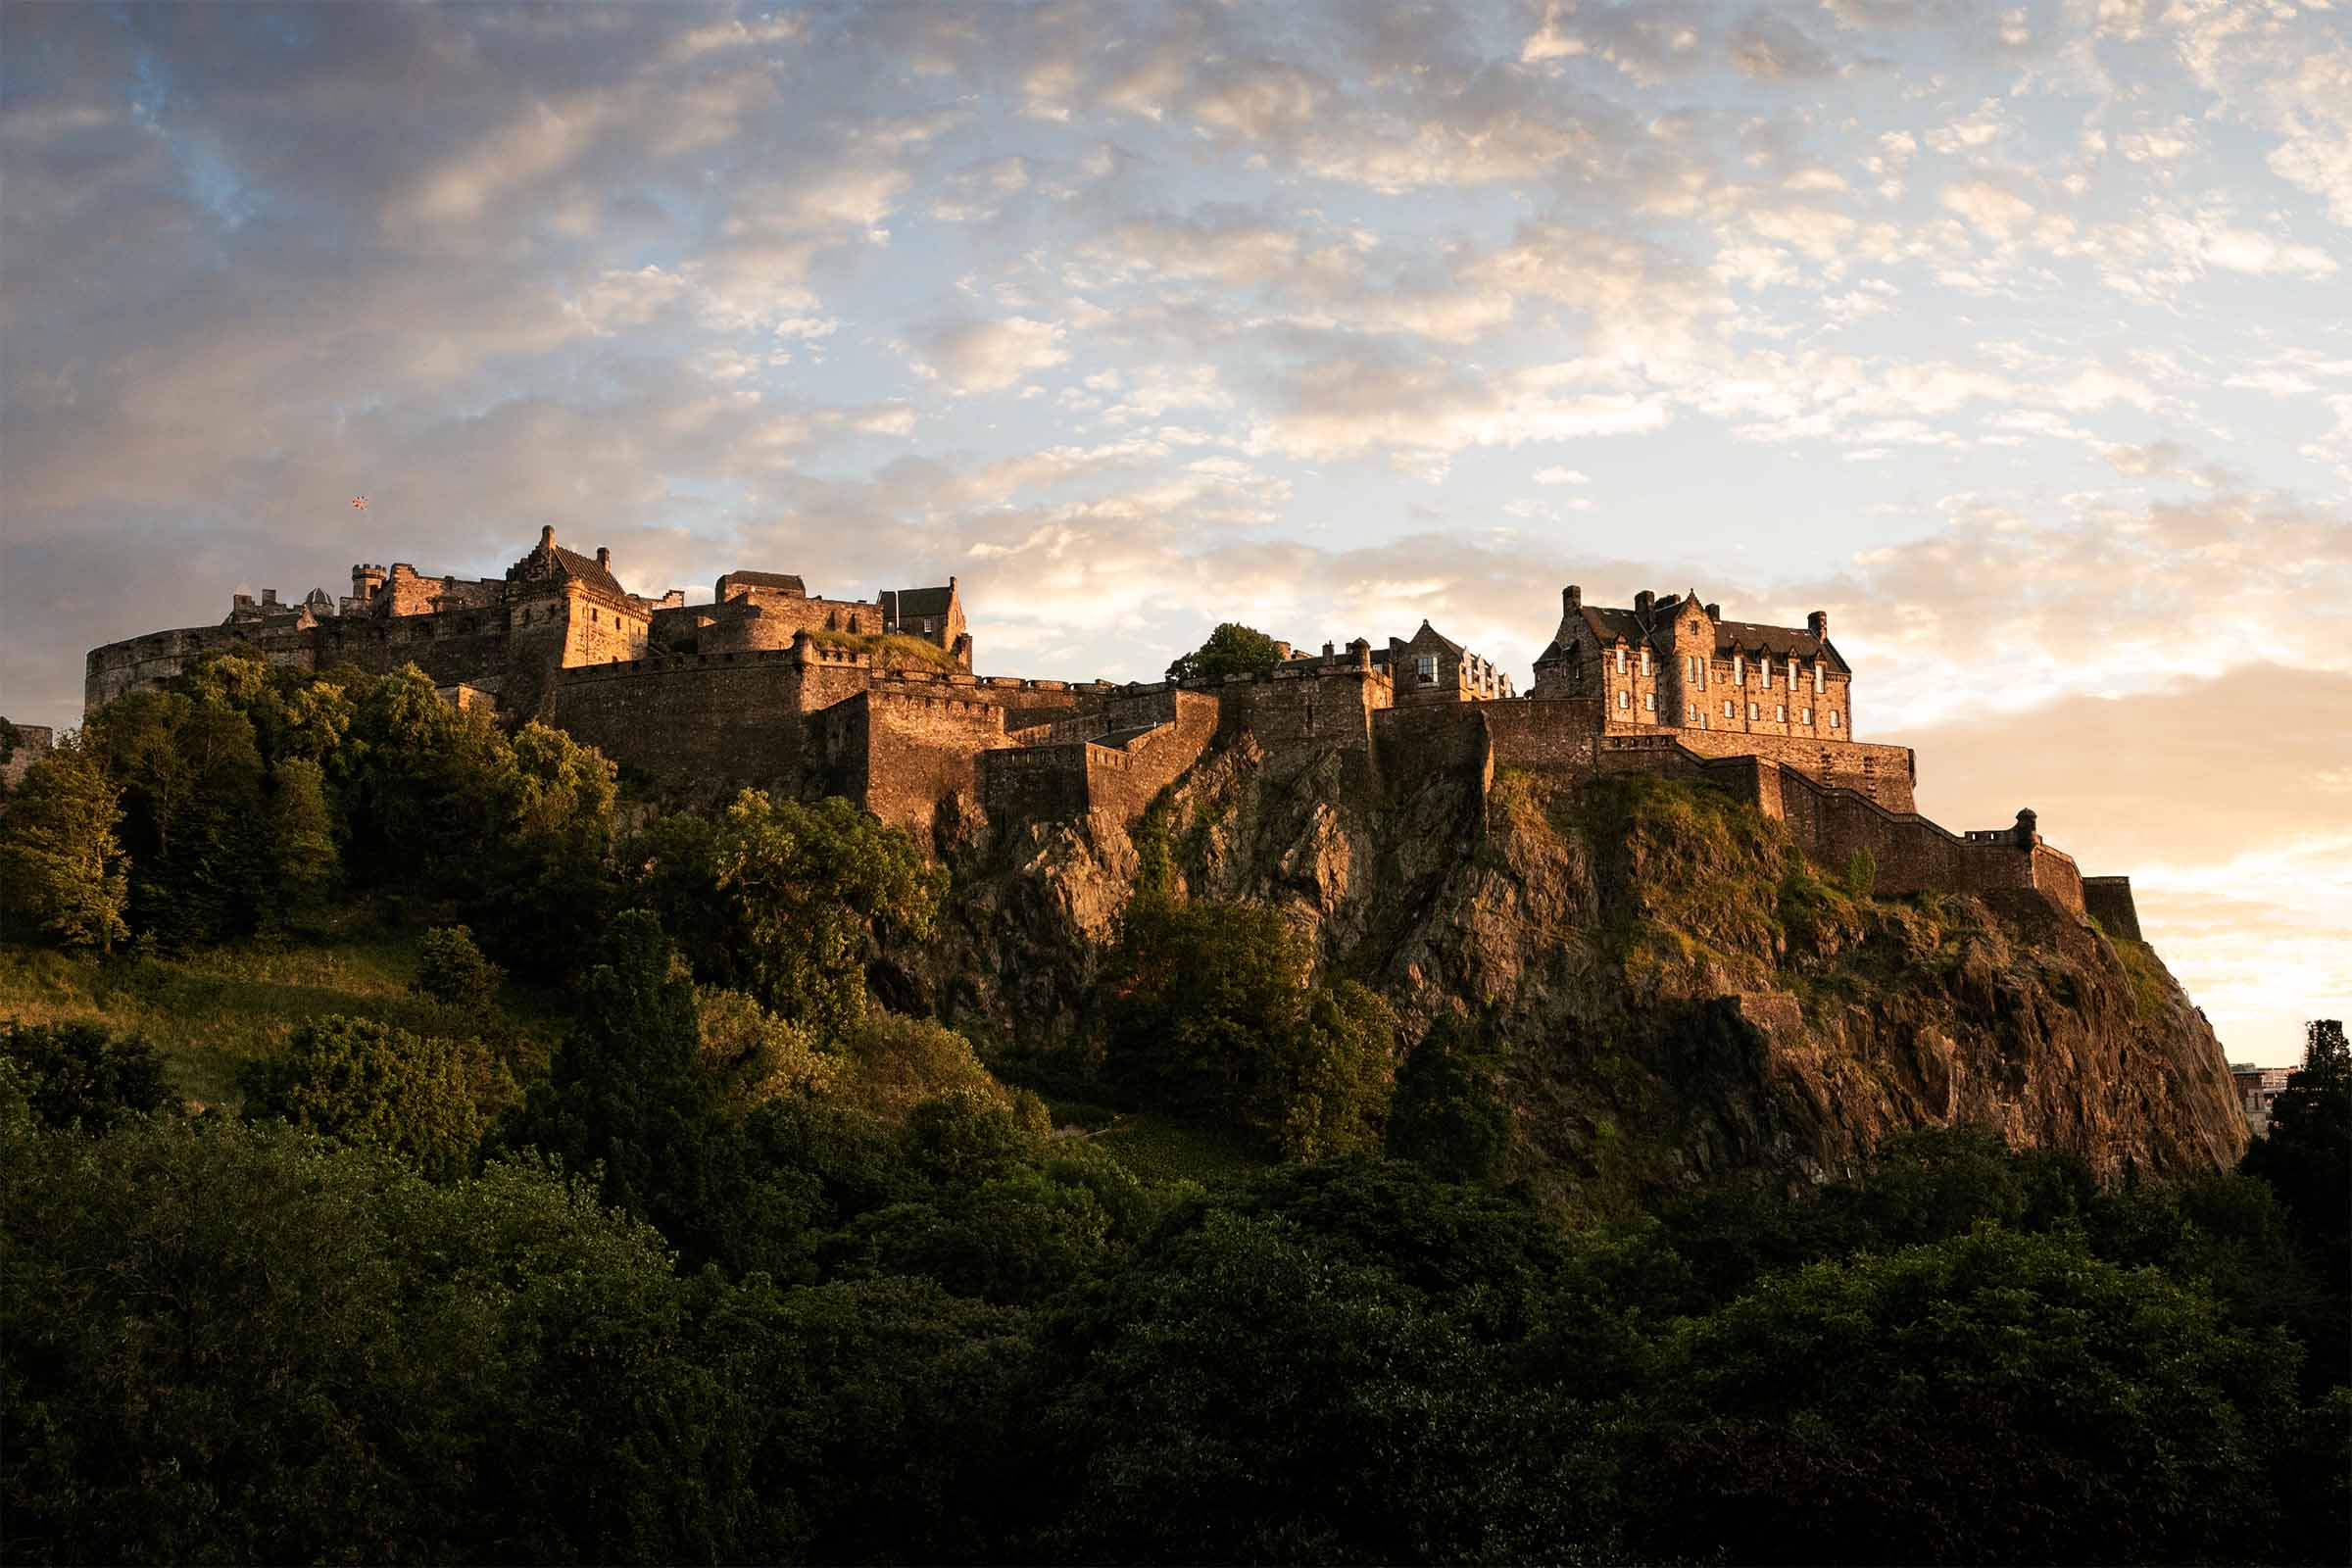 Edinburgh Sightseeing Tours | Special Offer | Parliament House Hotel